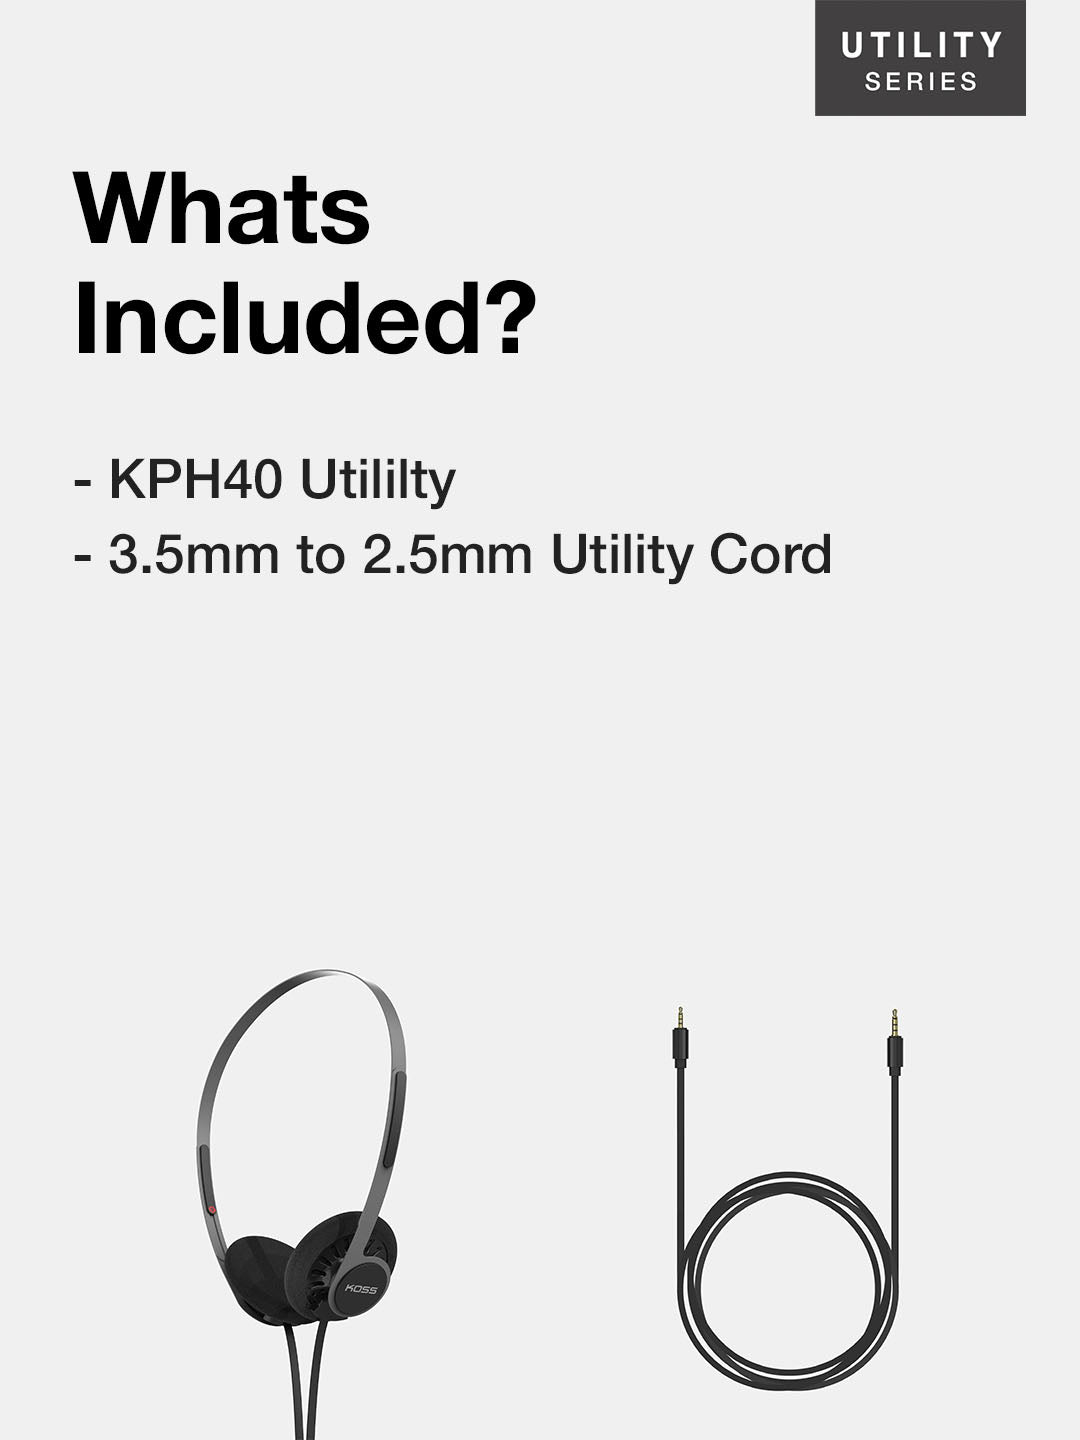 What's included? KPH 40 and 3.5mm to 2.5mm utility cord.